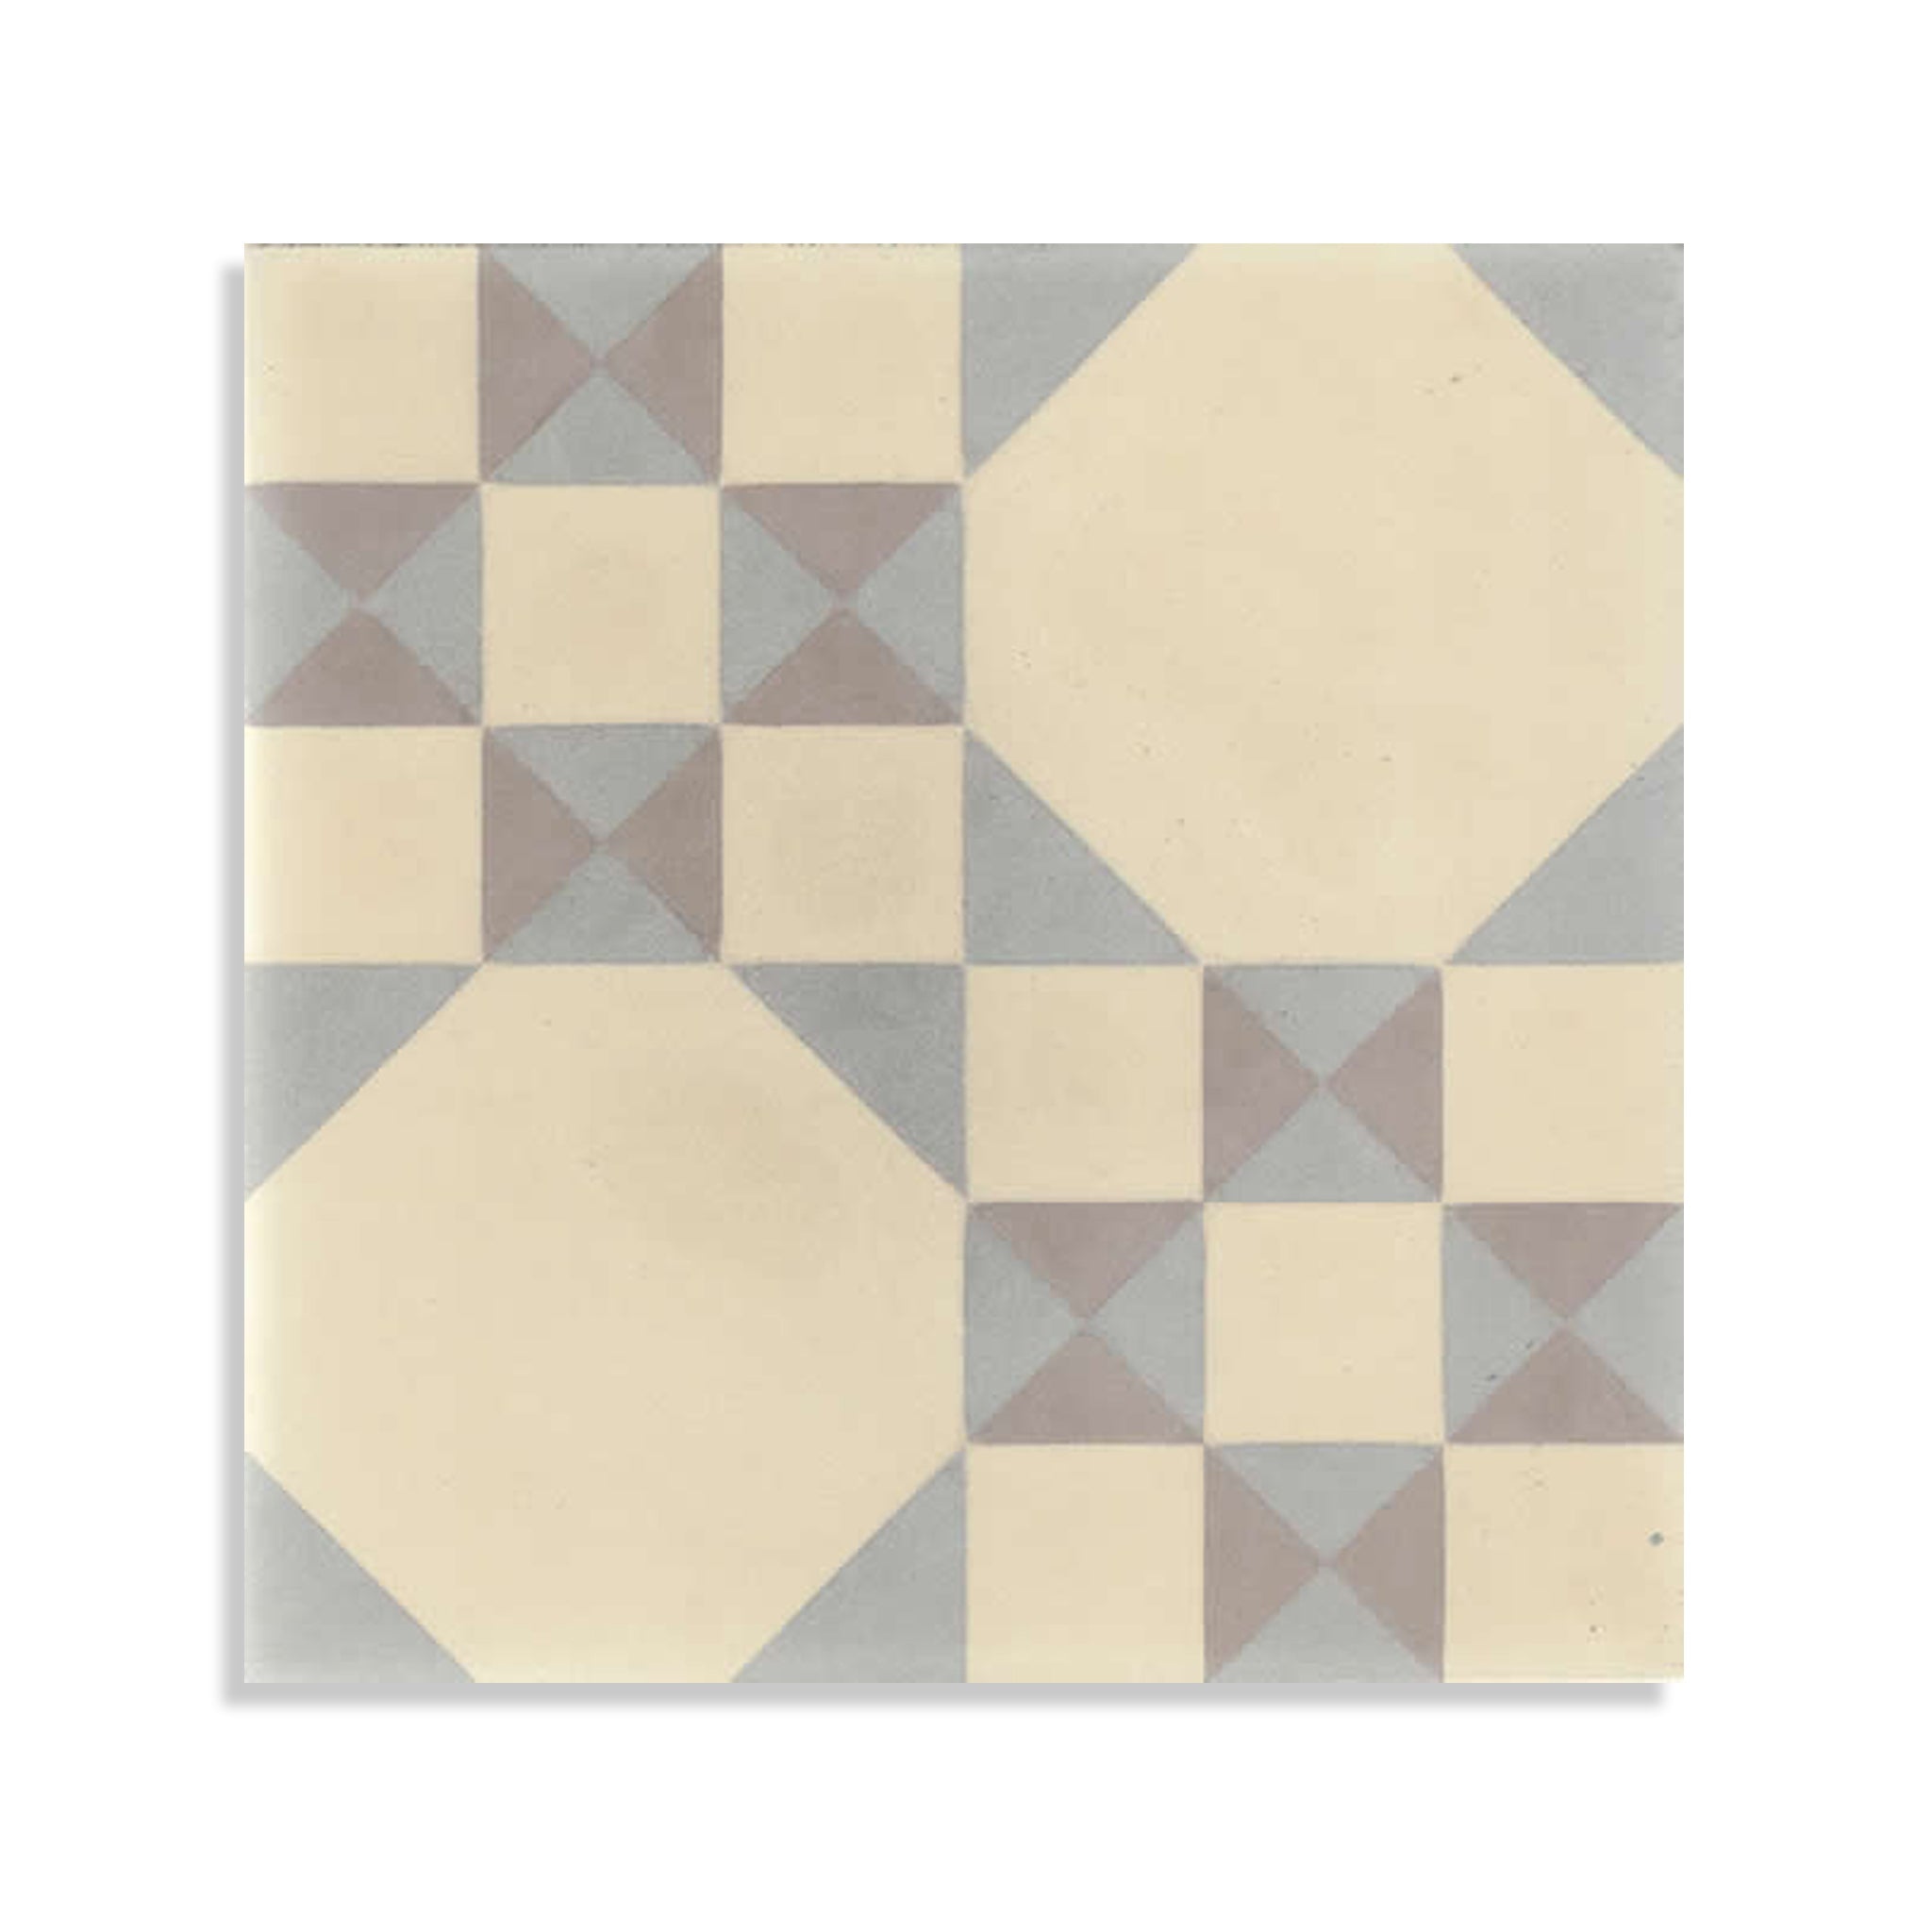 Moroccan Encaustic Cement Pattern gr04, 20 x 20cm - Tiles &amp; Stone To You